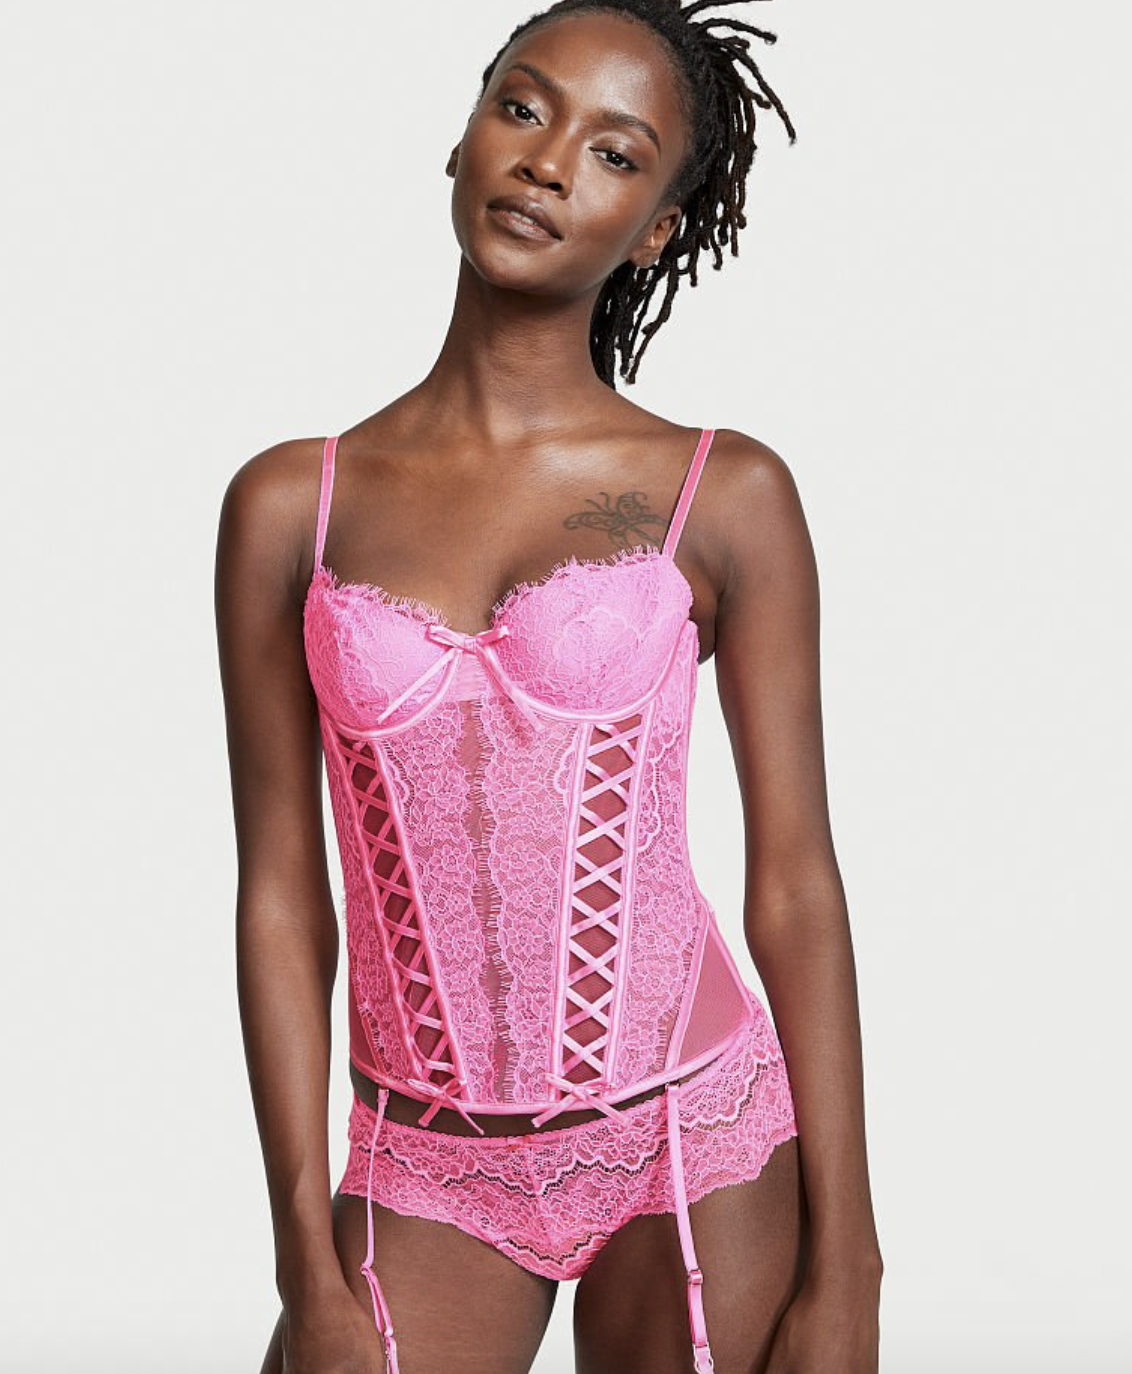 Wicked Unlined Lace-Up Corset Top